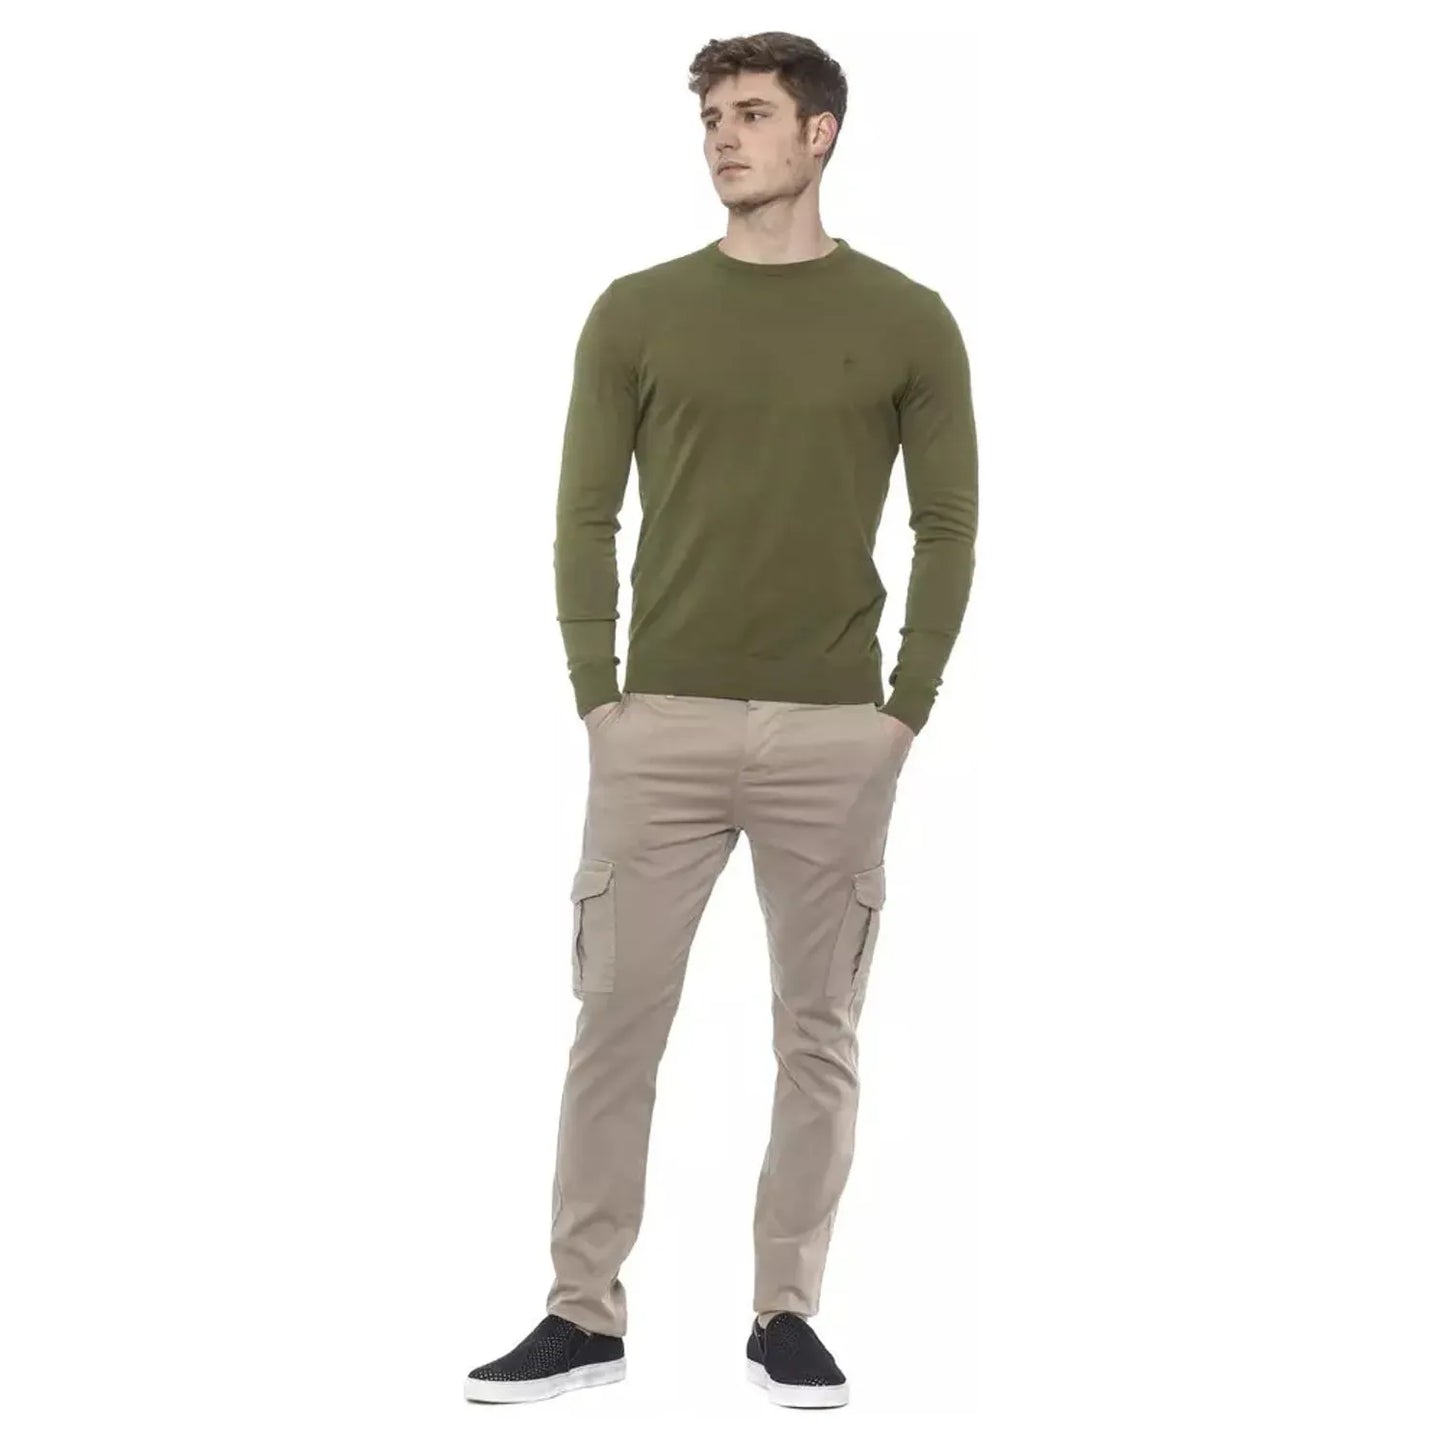 Conte of Florence Emerald Crewneck Cotton Sweater for Men olivegreen-sweater-1 stock_product_image_20333_371977899-15-c0d9f163-fb3.webp